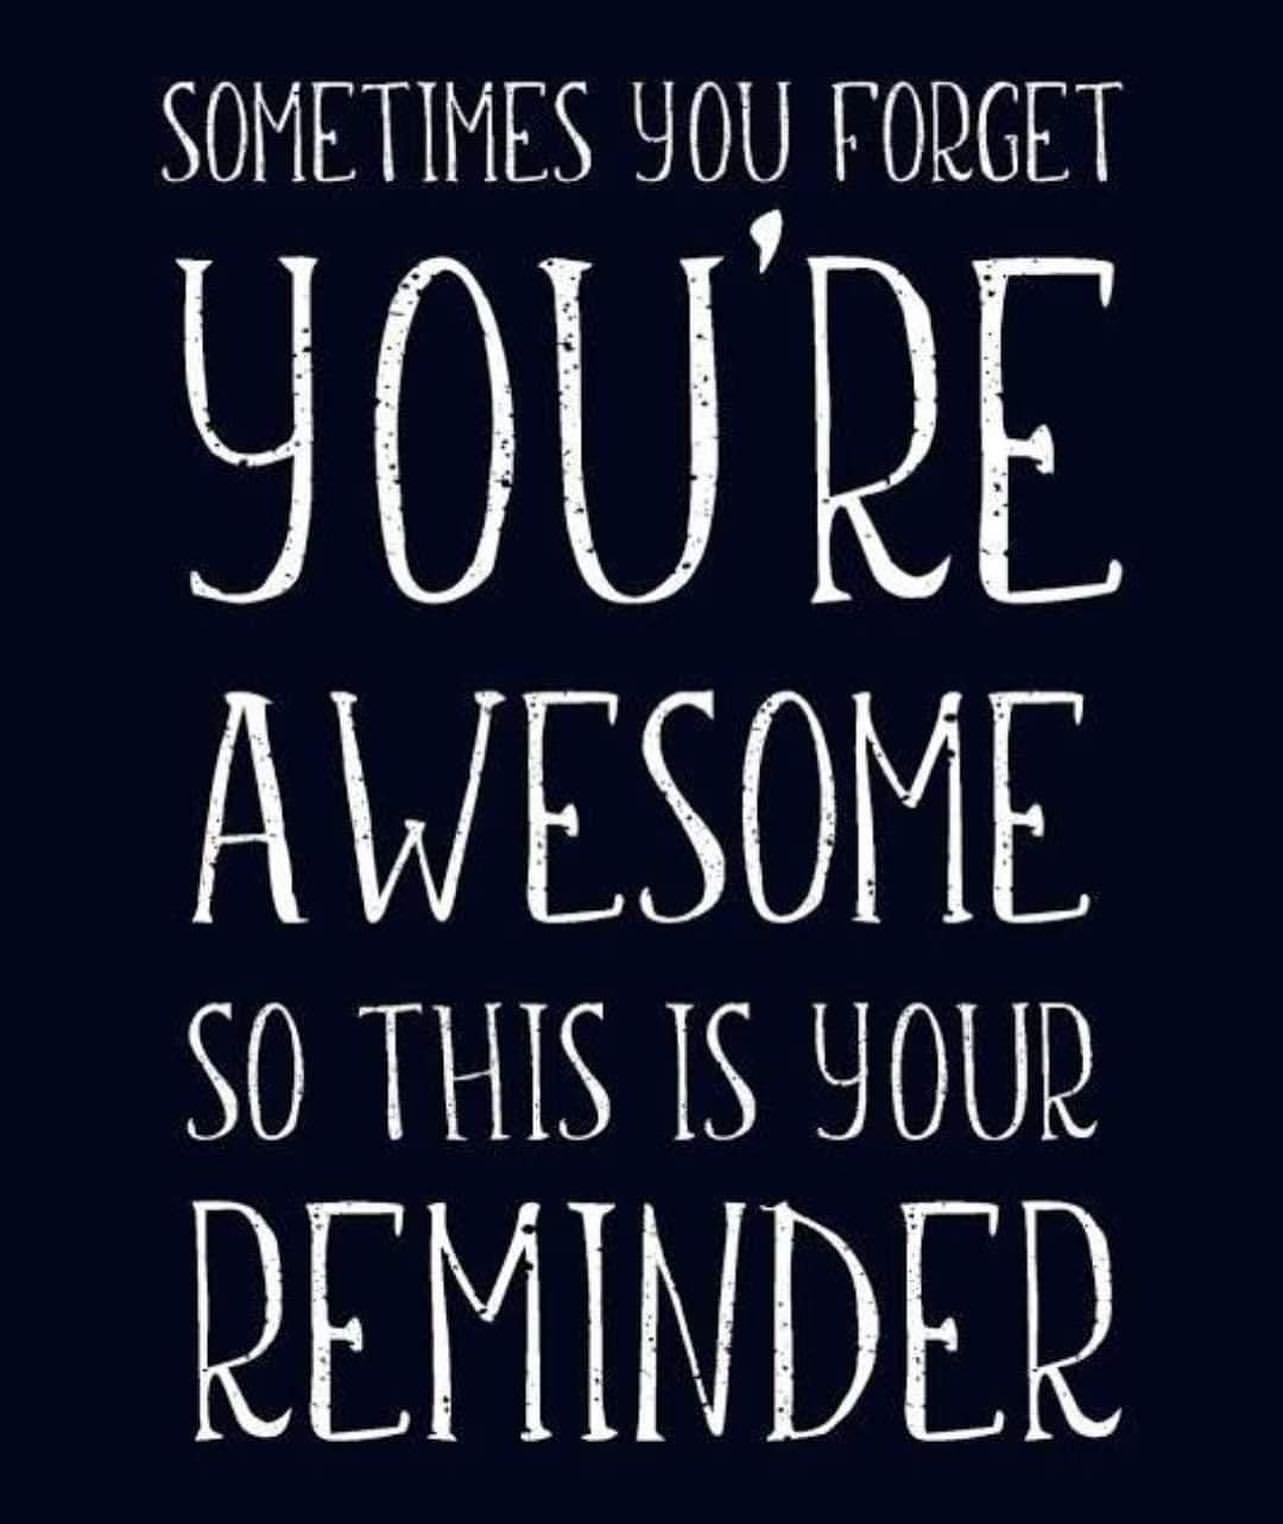 Sometimes you forget you're awesome so this is your reminder.